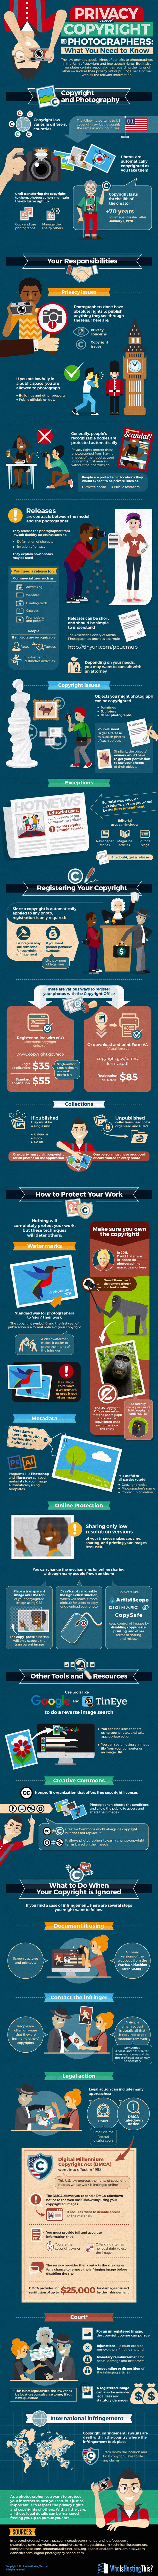 What Photographers Need to Know about Privacy and Copyright Infographic